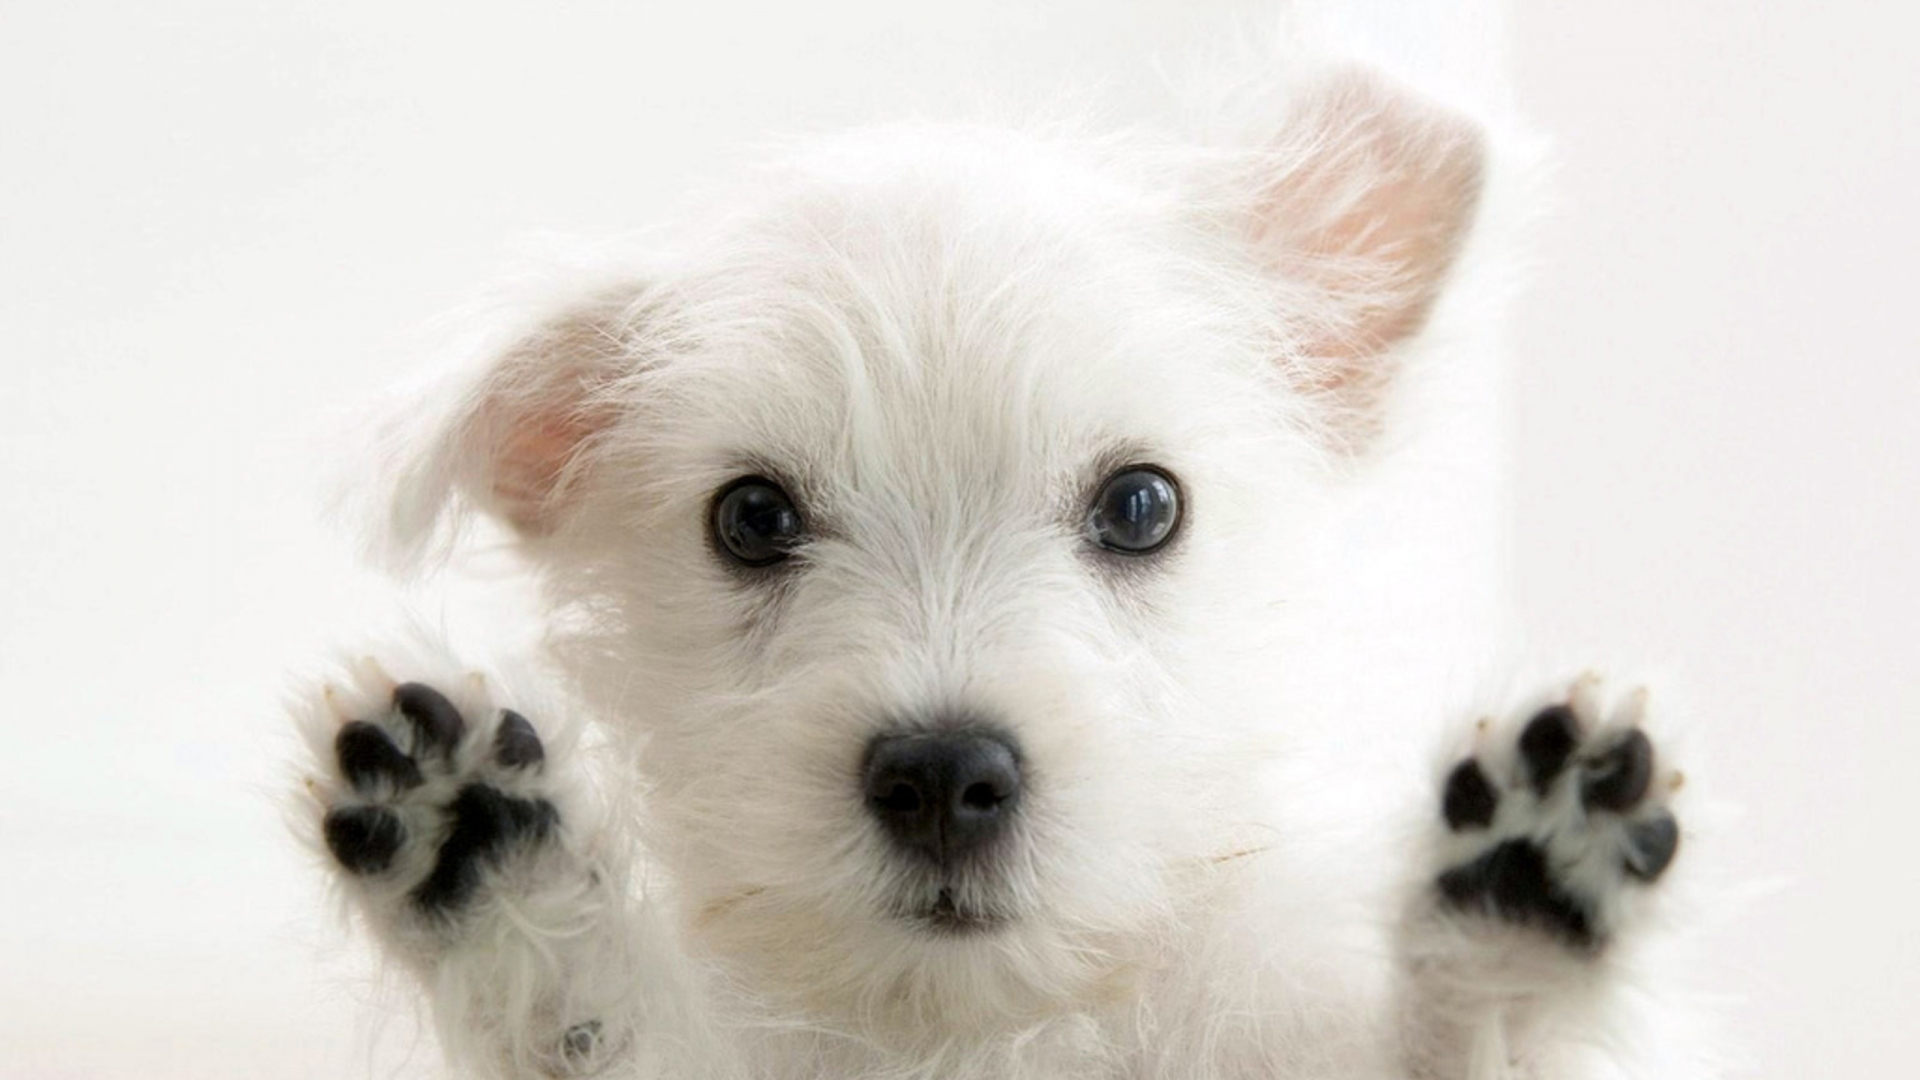 Very cute Dog for 1920 x 1080 HDTV 1080p resolution